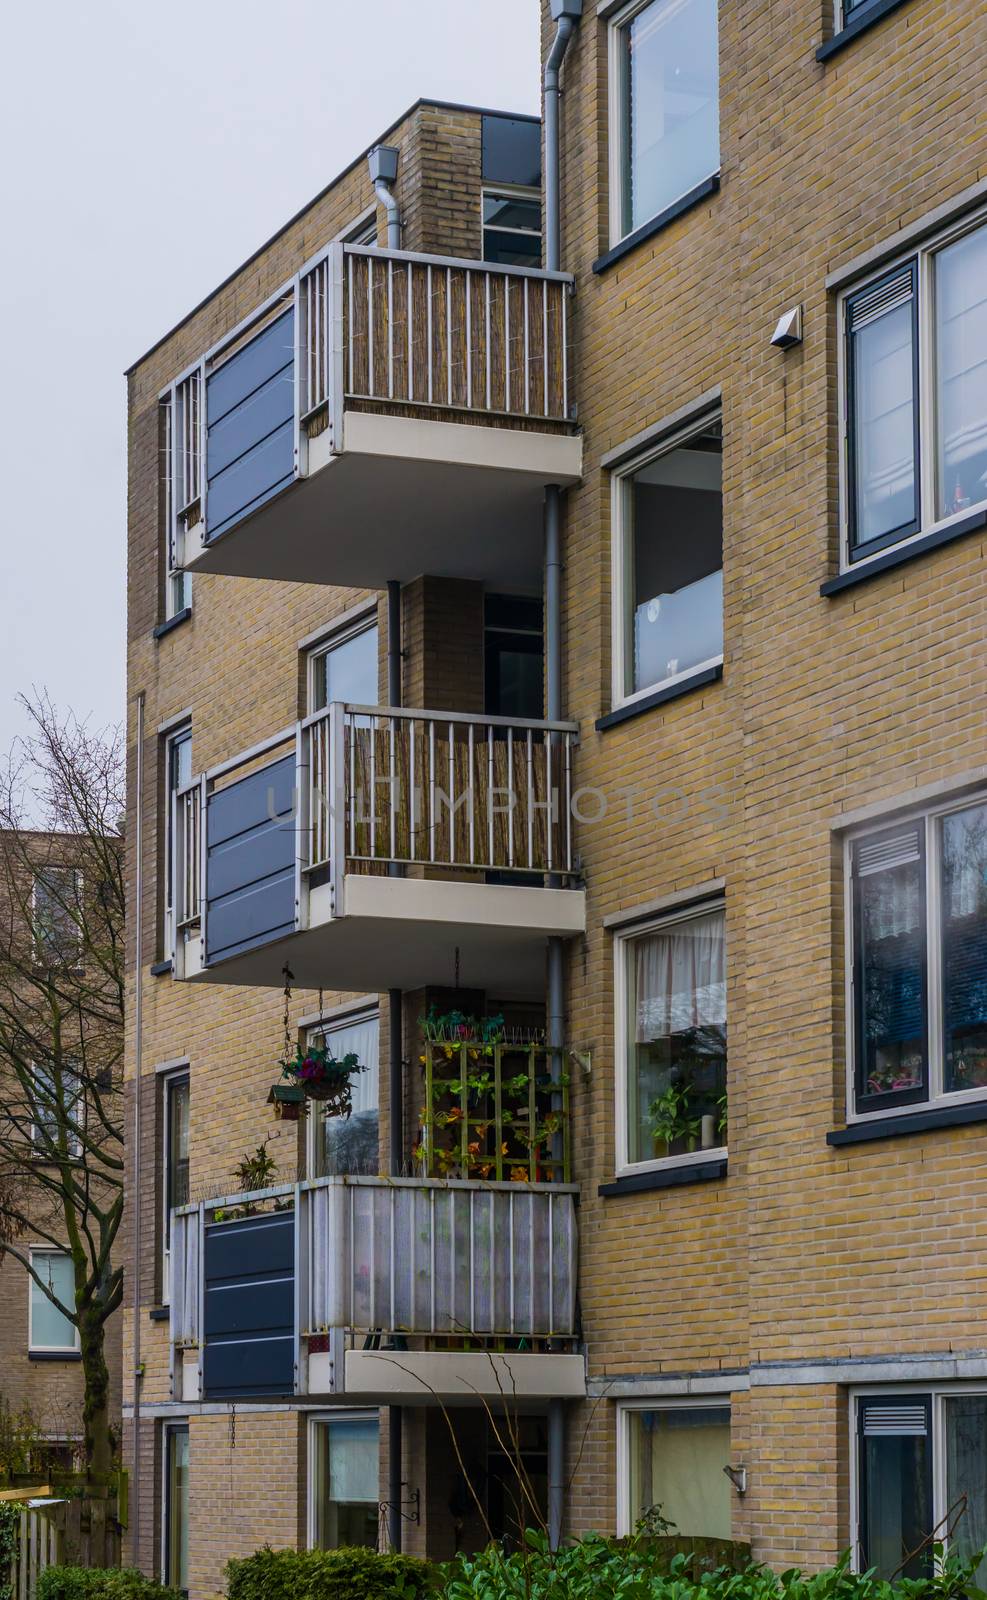 Apartments building with balcony's, Modern dutch city architecture